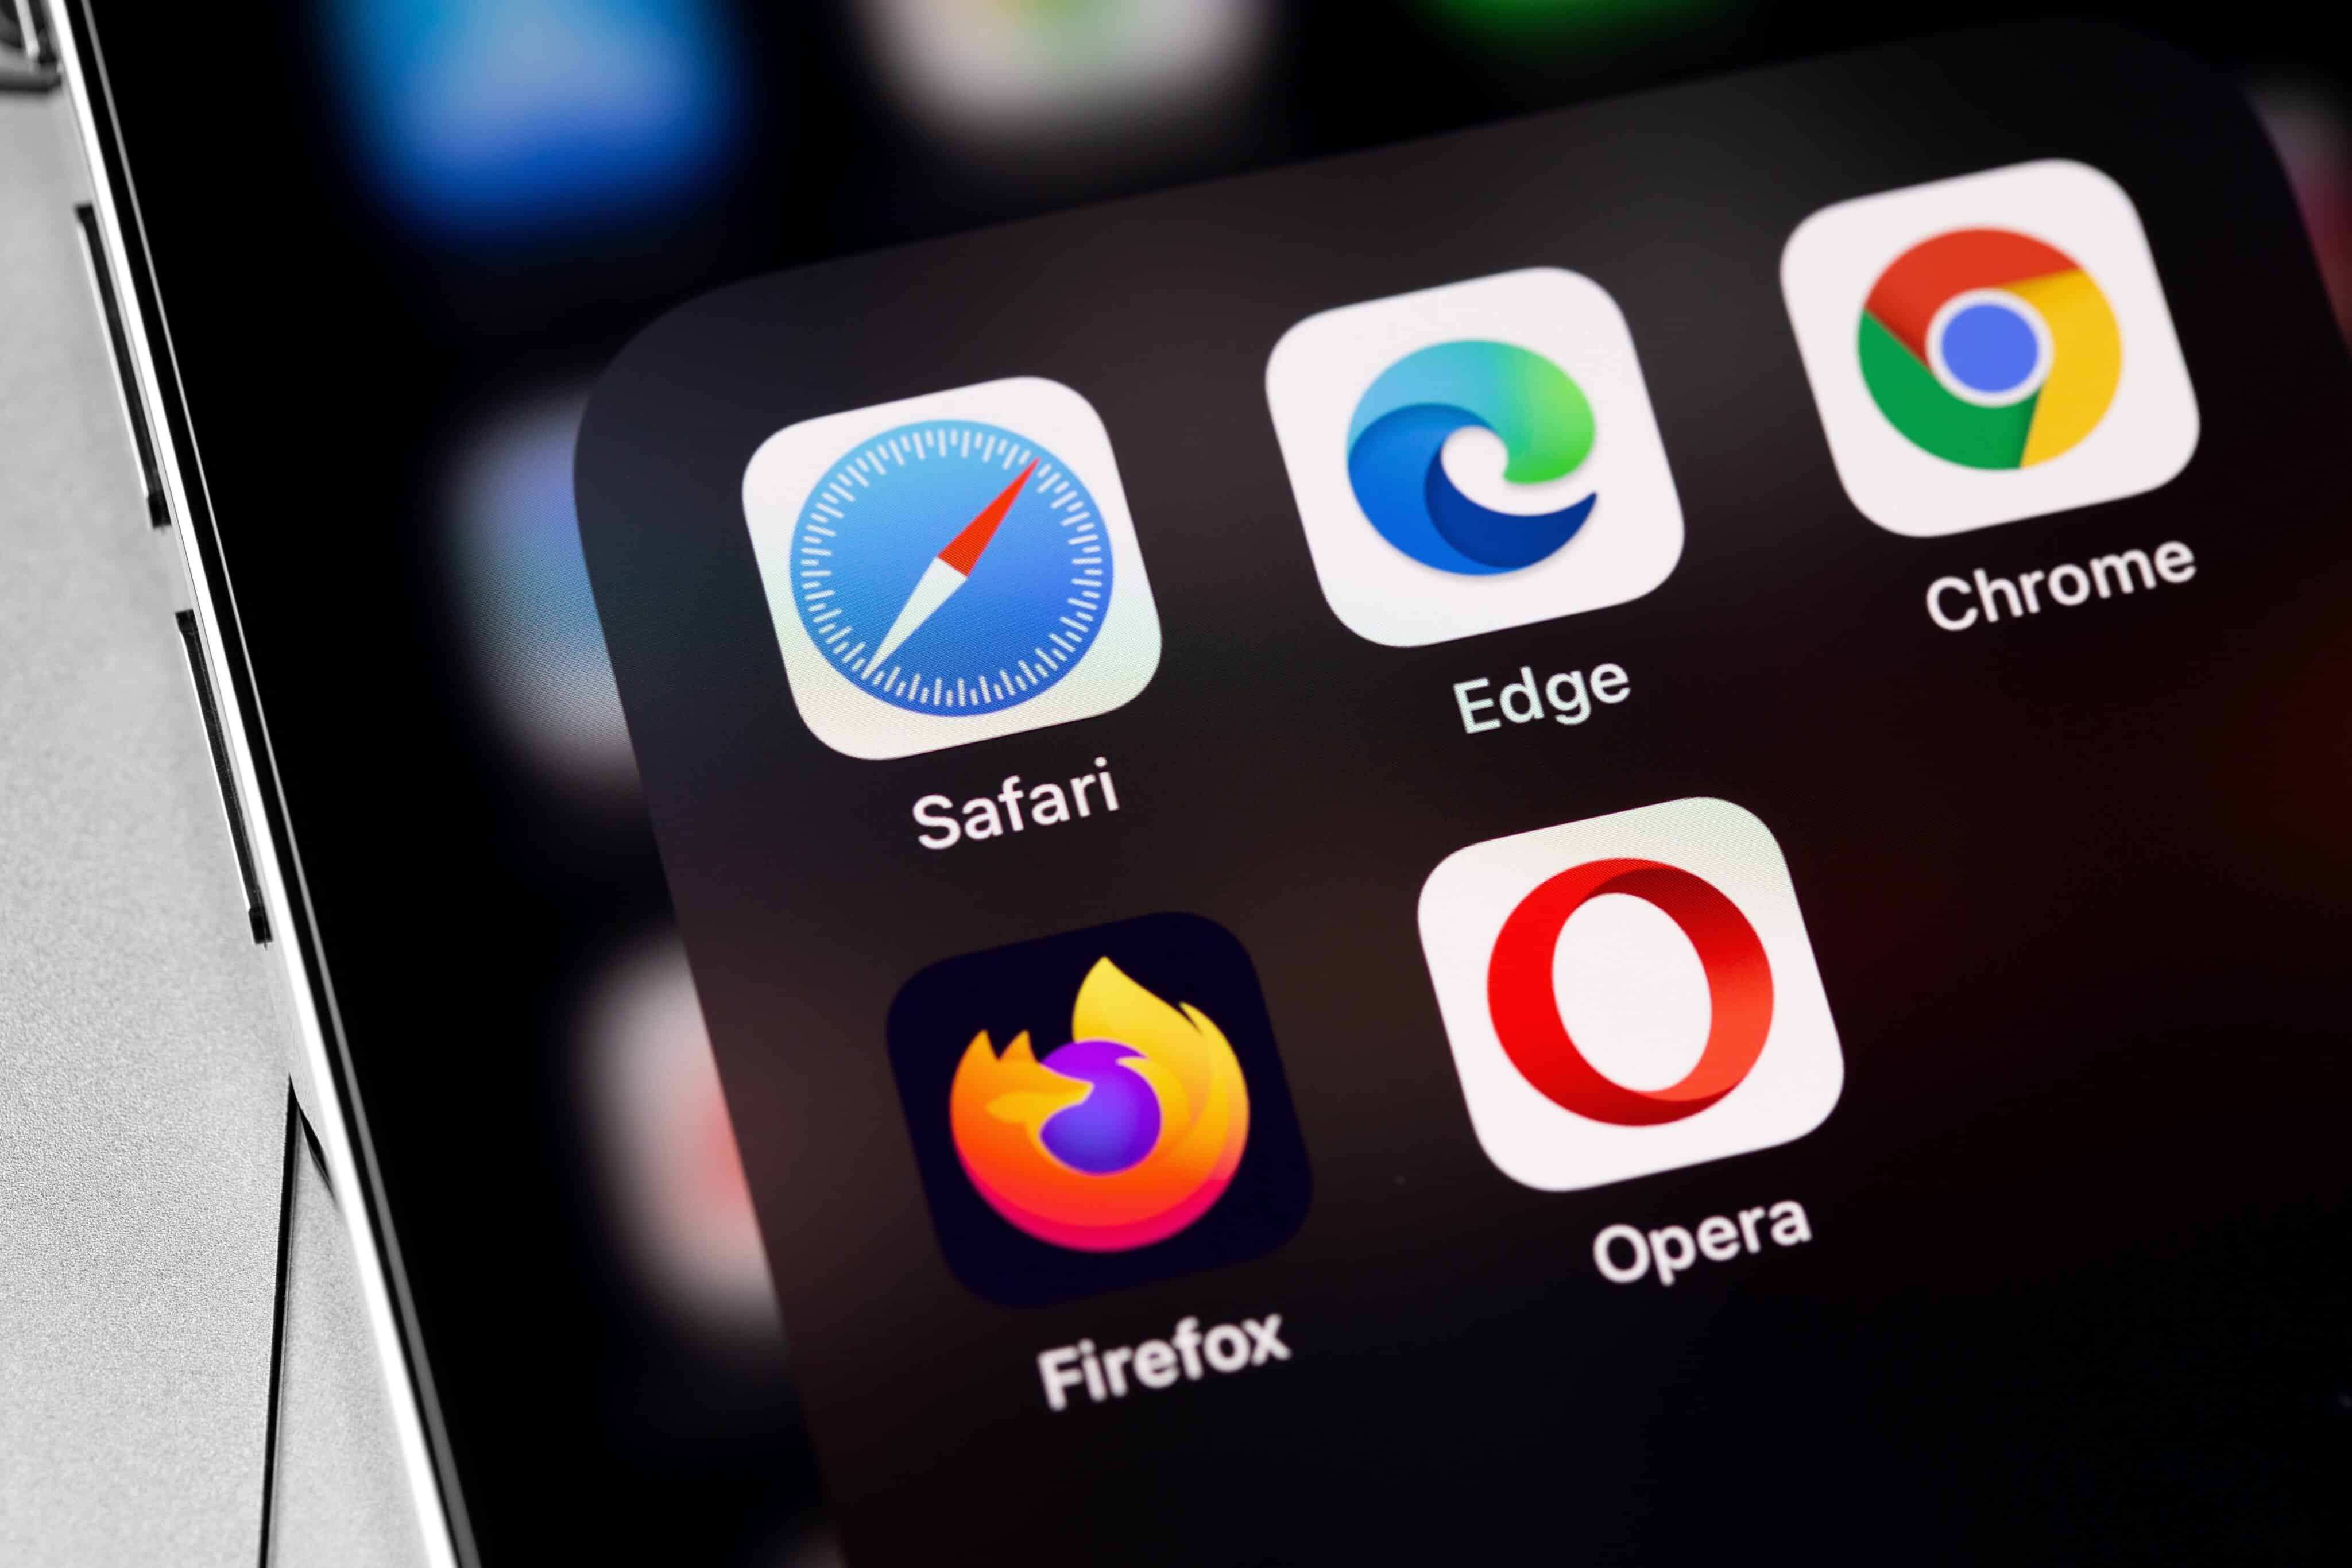 Edge is second only to Safari among the most used browsers on desktop